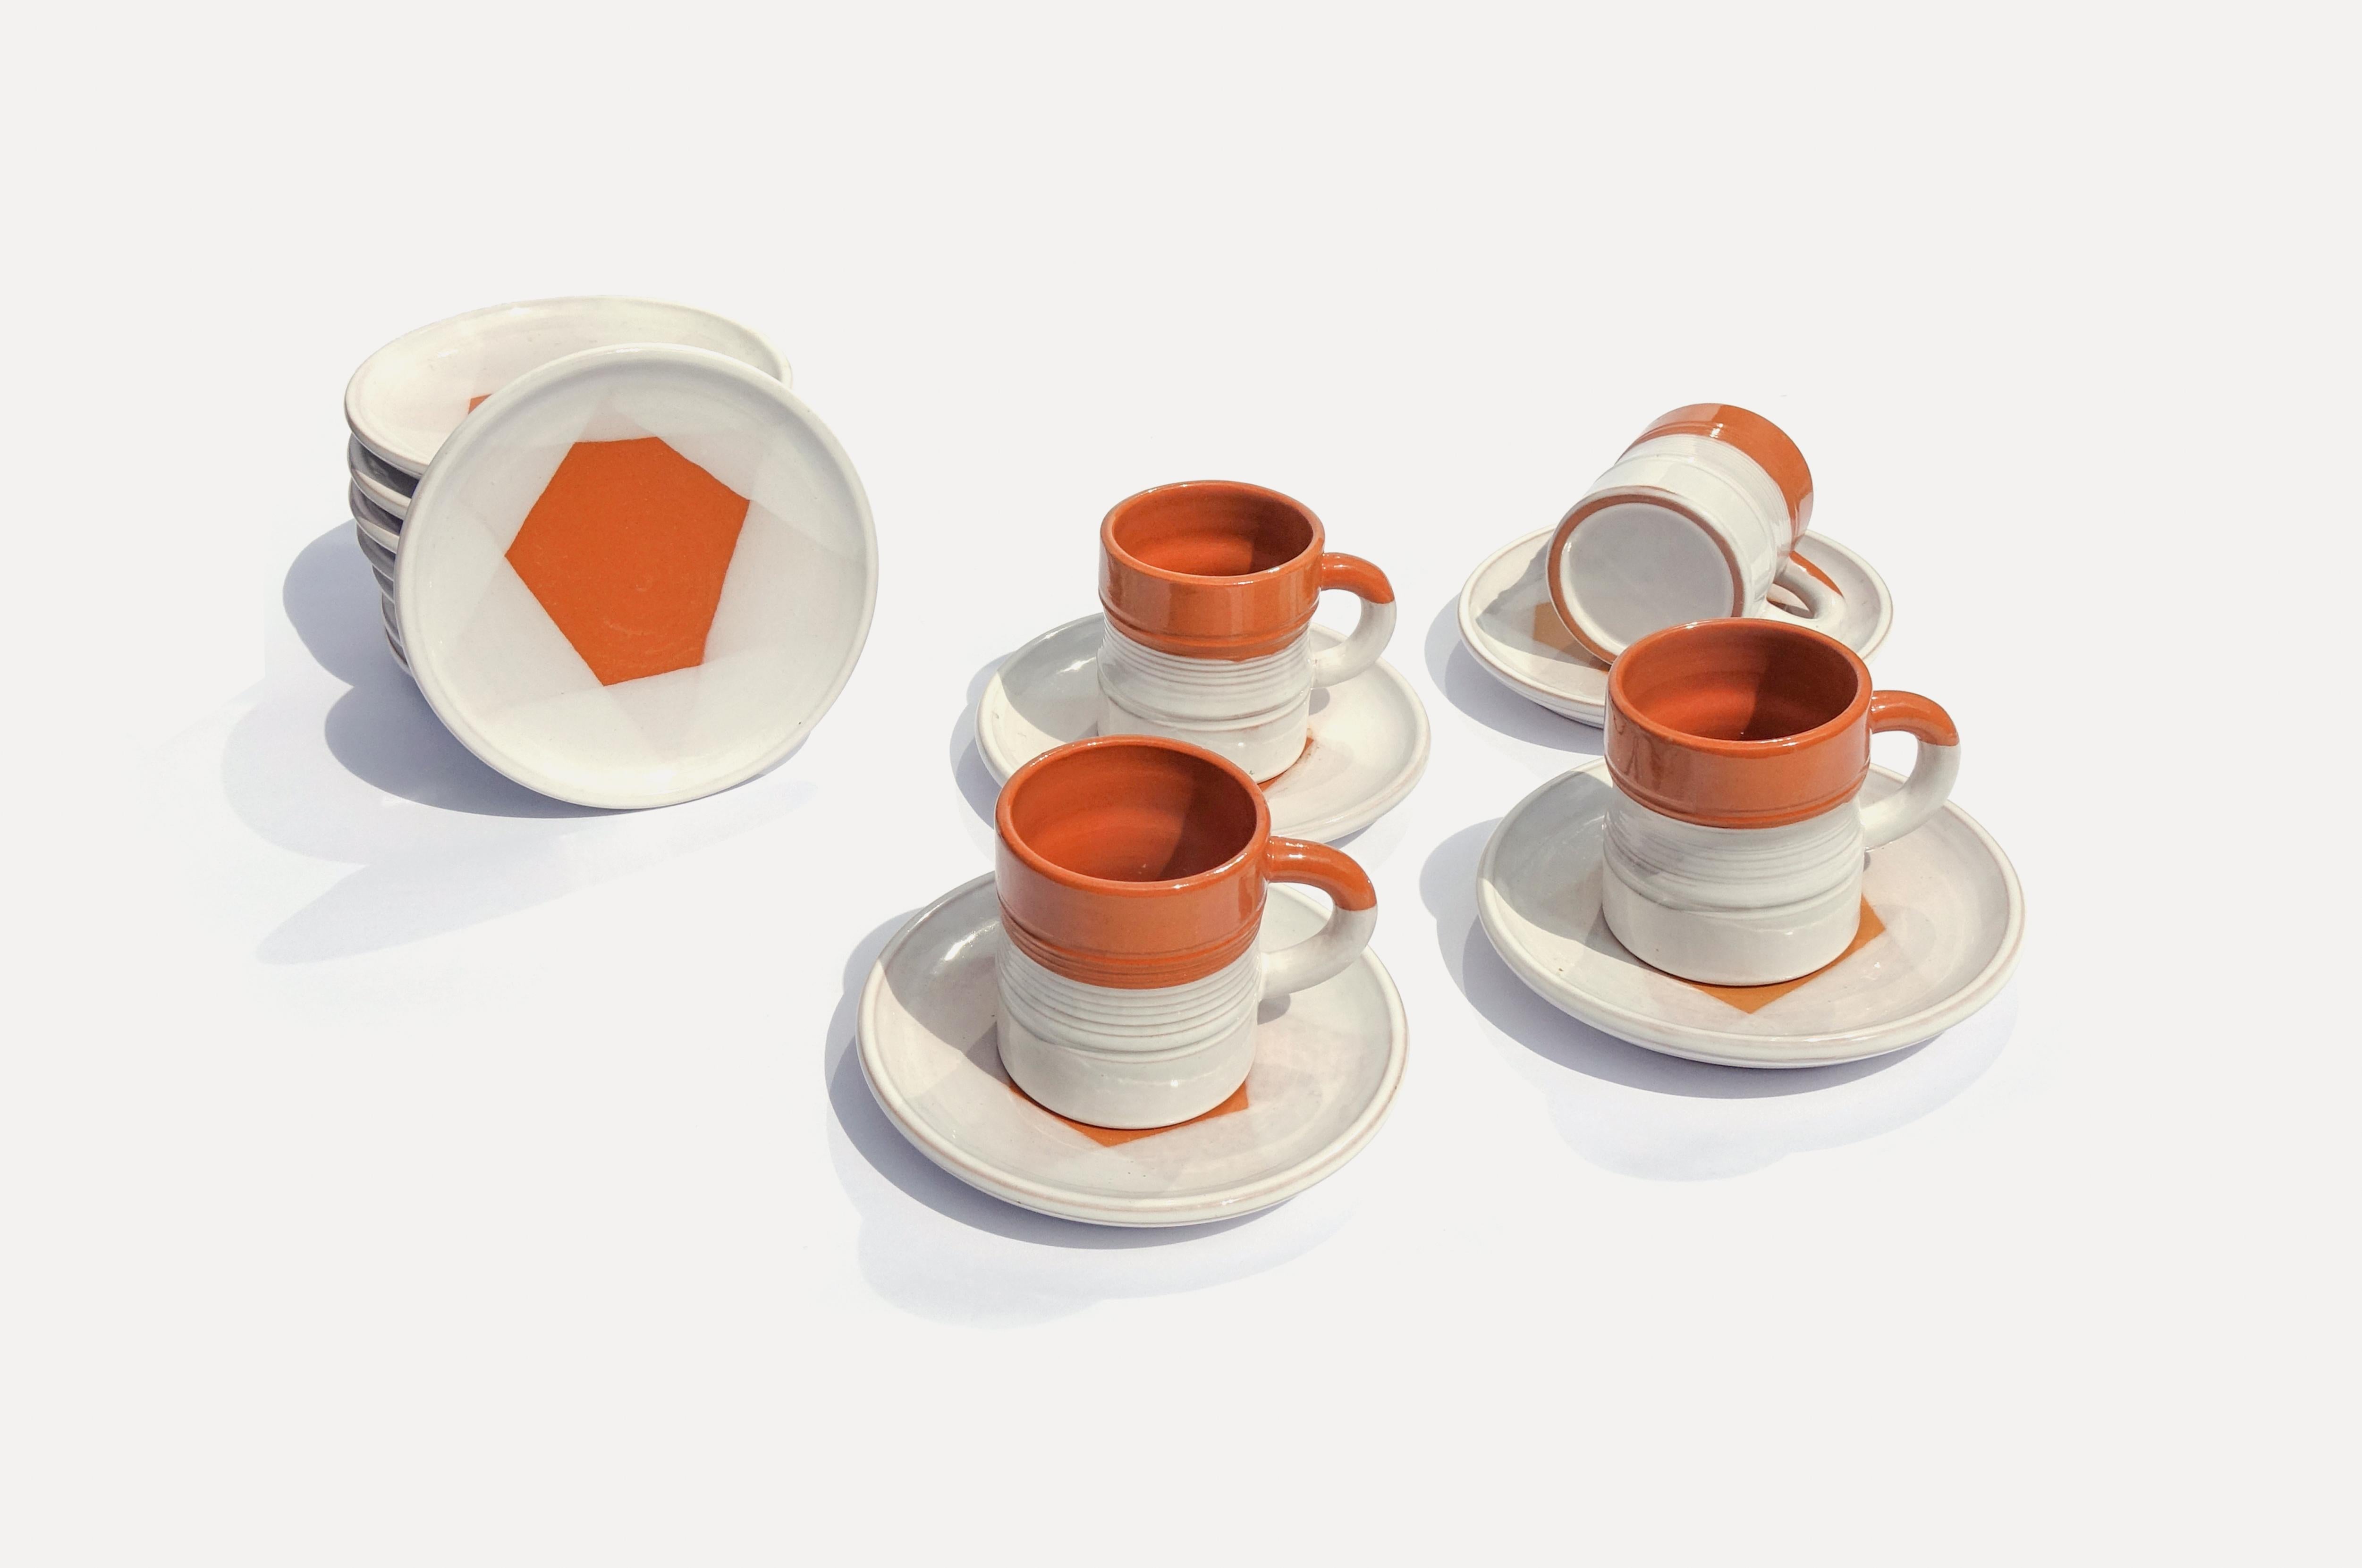 Modernist coffee service from Willy Dougoud's ceramic studio. 23 pieces with 10 coffee cups and saucers, a cream jug, a sugar bowl and a coffee pot. Each piece has a unique glaze and is slightly different. Perfect condition.